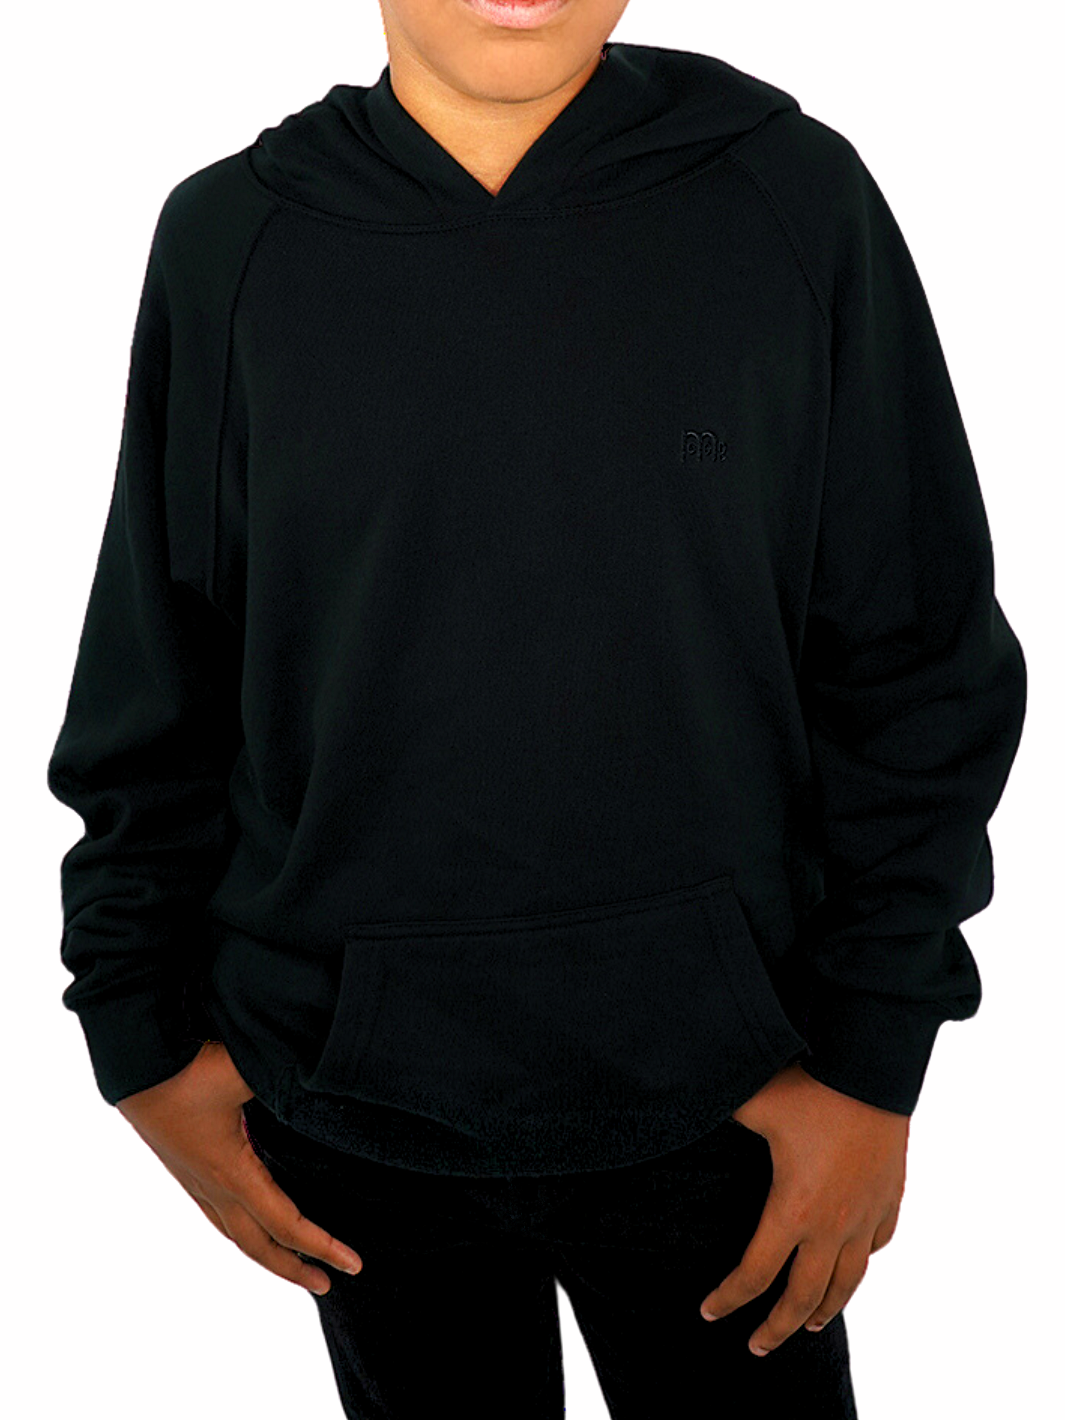 Youth Pullover Hoodie Black with Black logo at left chest. Sizes 6 to 16